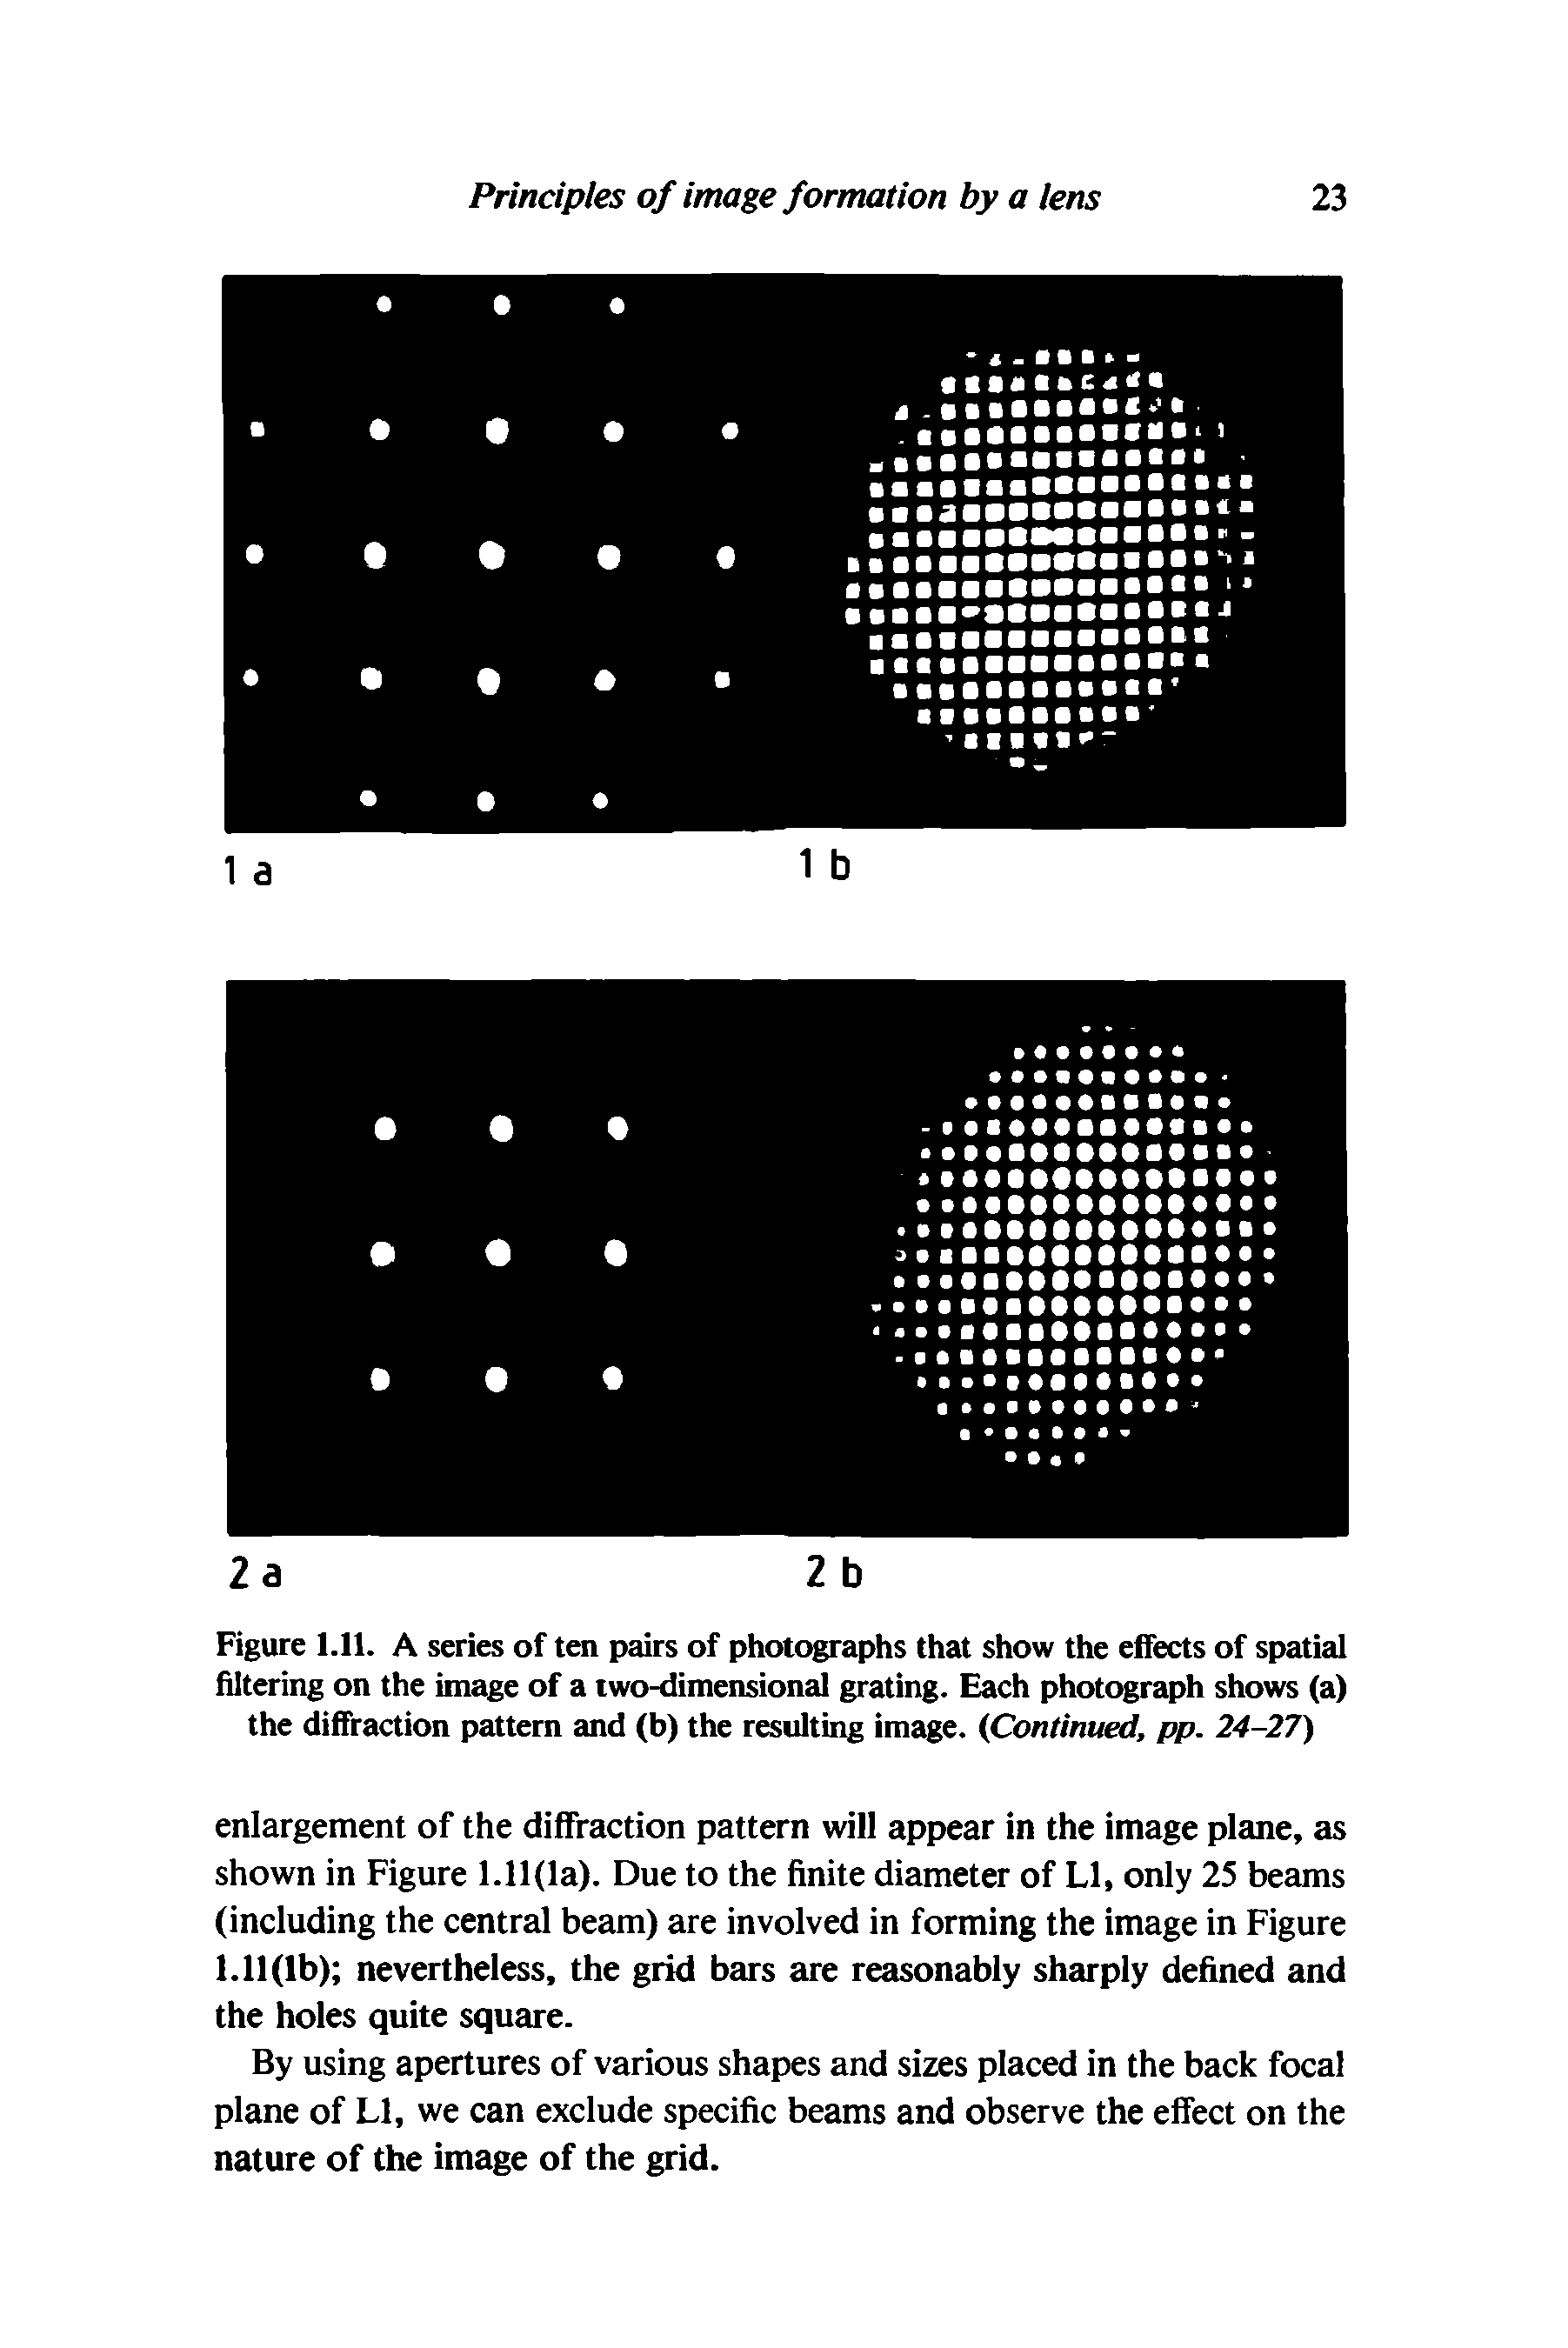 Figure 1.11. A series of ten pmrs of photographs that show the effects of spatial filtering on the image of a two-dimensional grating. Each photograph shows (a) the diffraction pattern and (b) the resulting image. (Continued, pp. 24-27)...